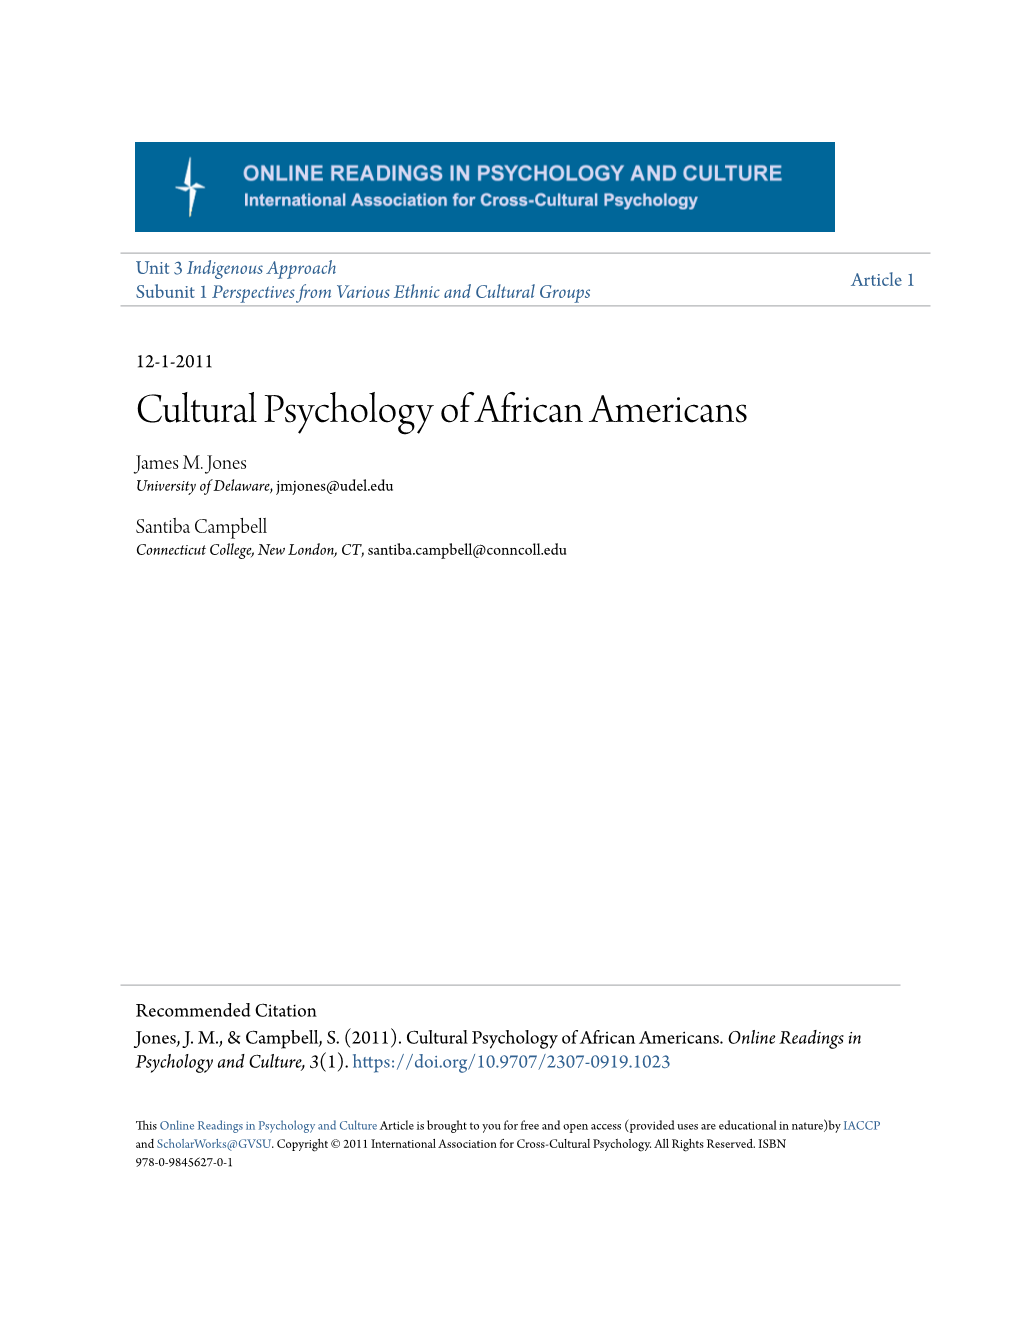 Cultural Psychology of African Americans James M